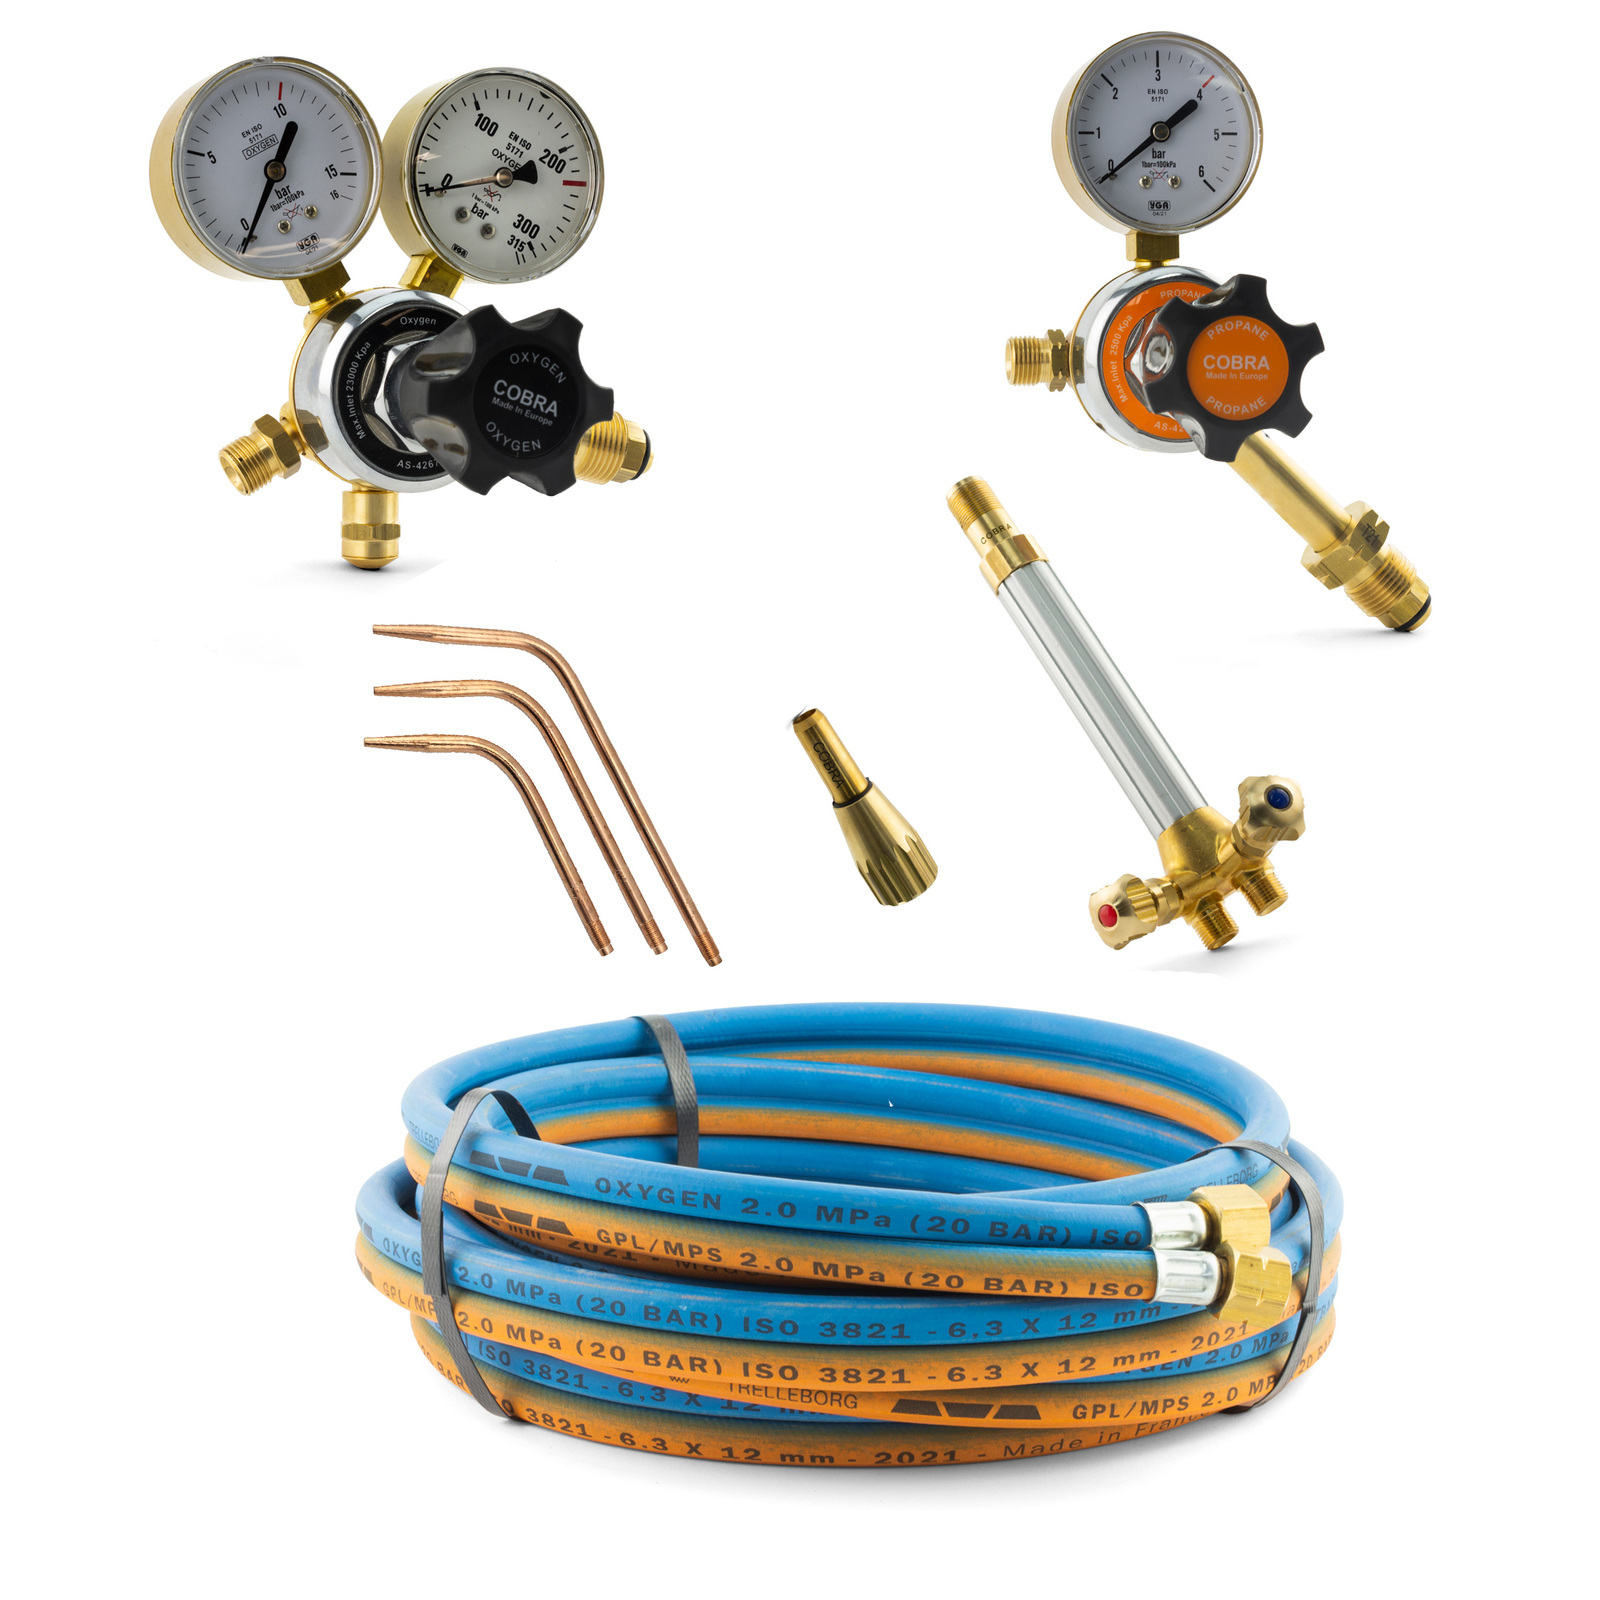 Brazing Equipment Oxygen and LPG Brazing Kit - 5m Twin Hose - 3 Tips - Comet - OXY